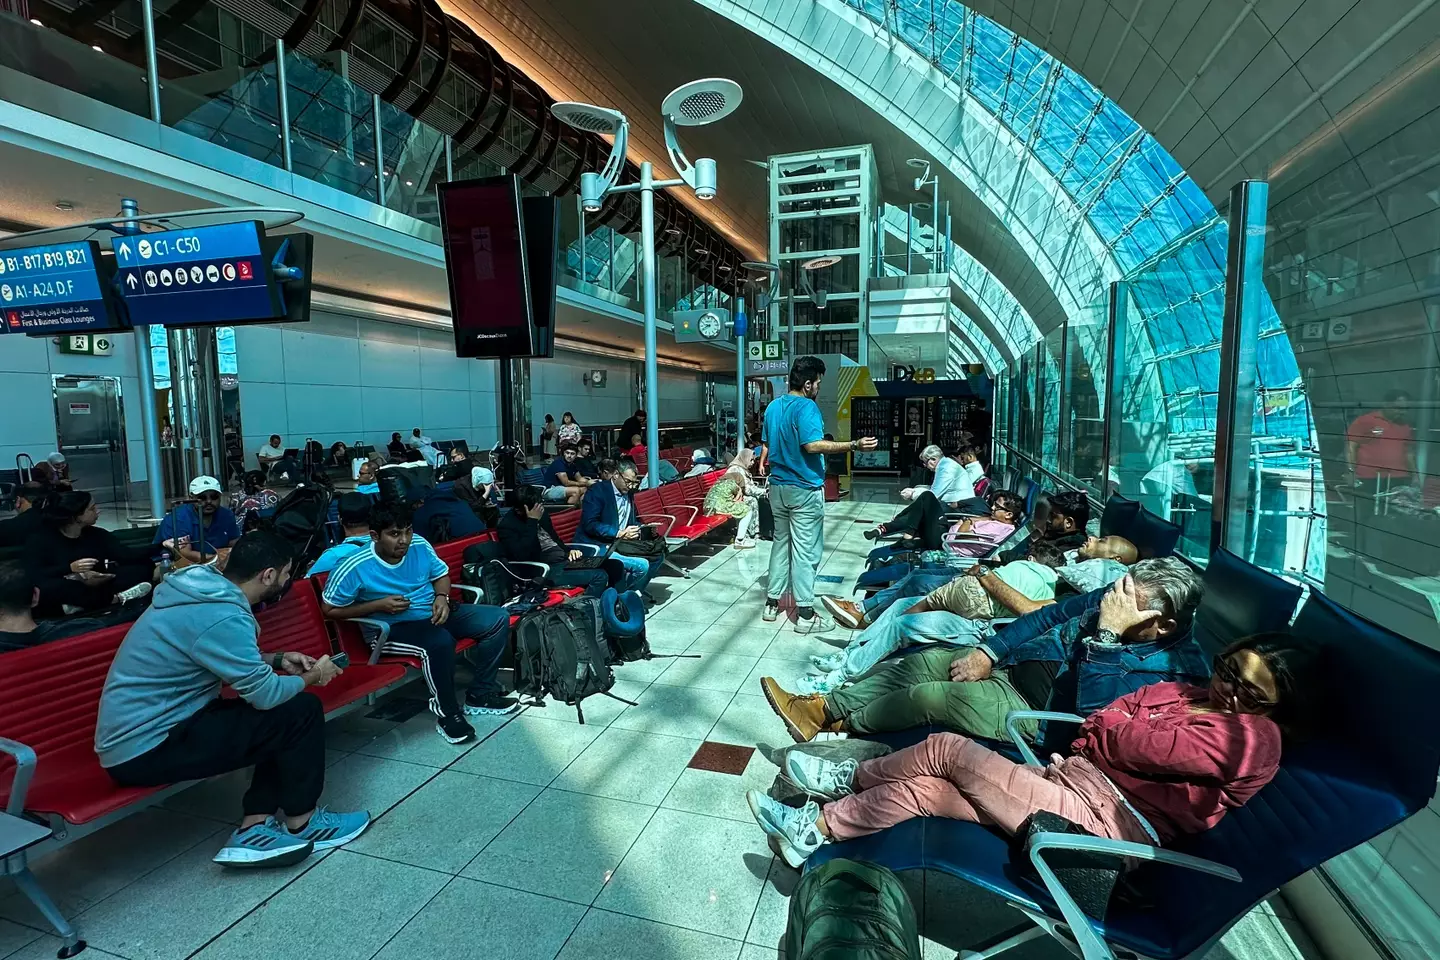 Dubai International Airport has told people to stay away if possible. (AFP via Getty Images)